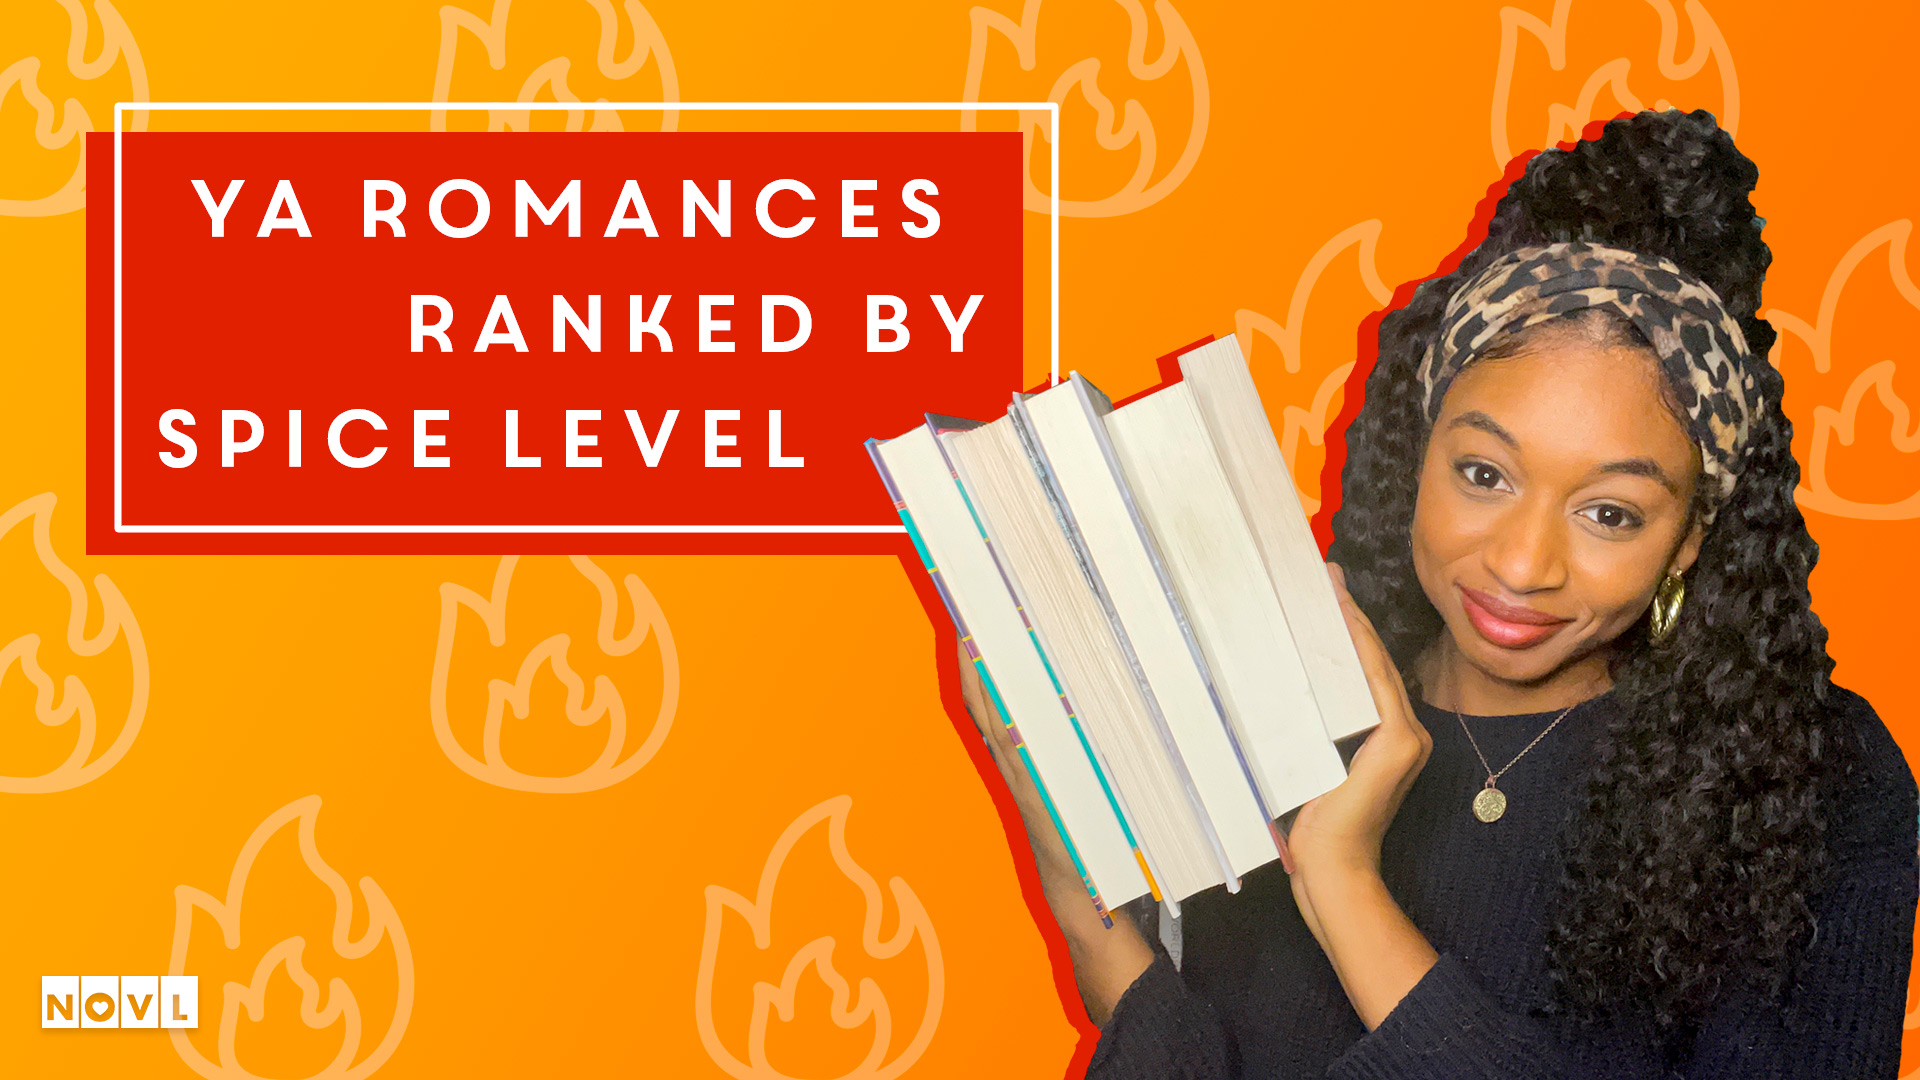 The NOVL Blog, Featured Image for Article: YA Romances Ranked by Spice Level